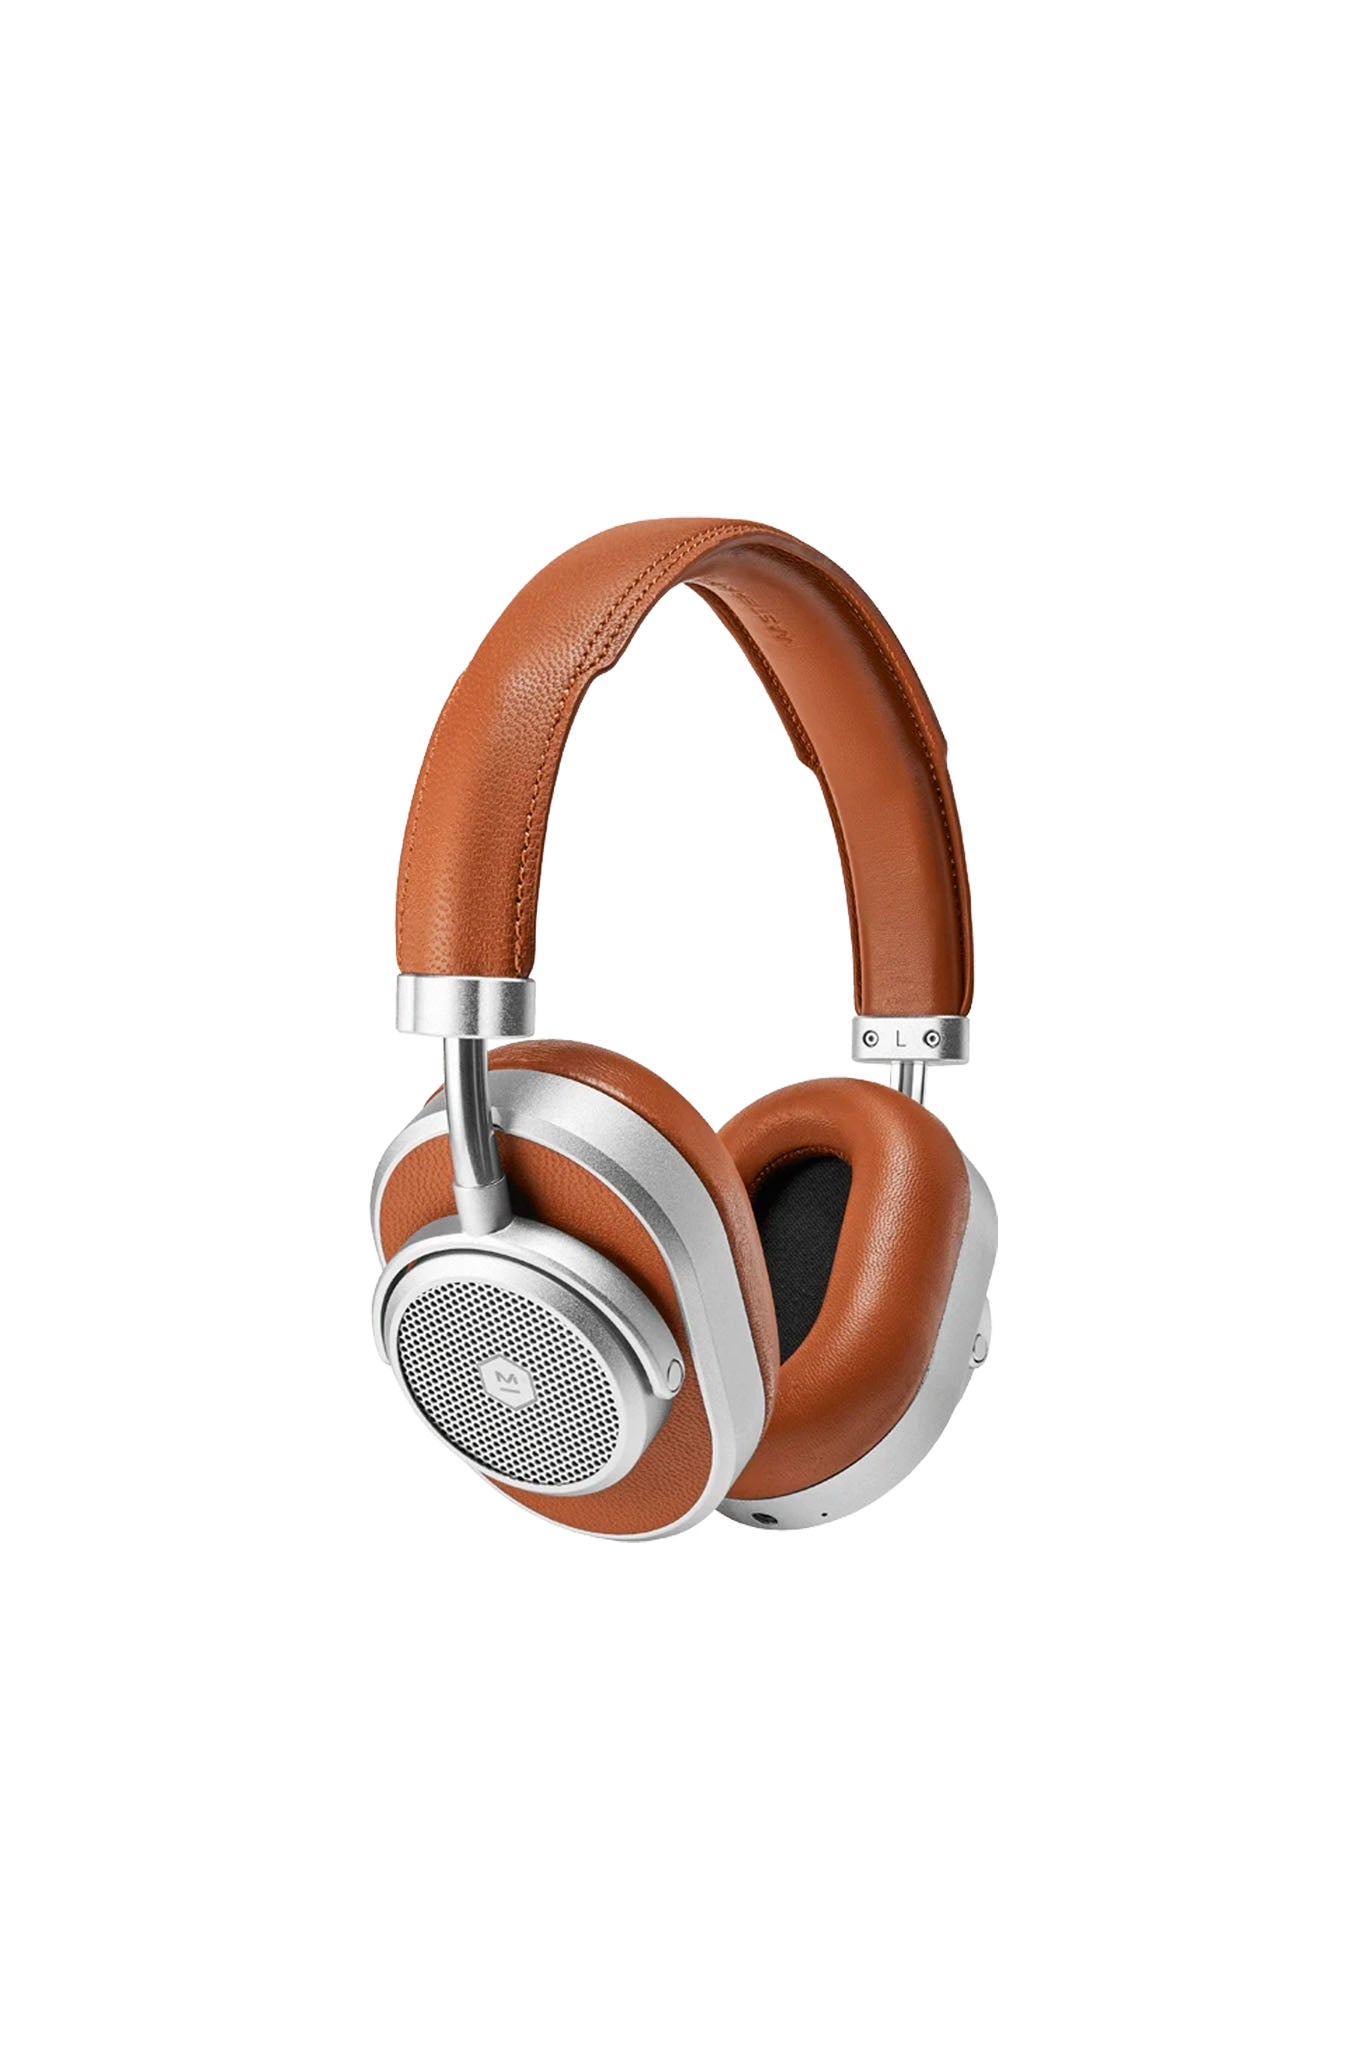 Silver & Brown Noise Cancelling Wireless Headphones